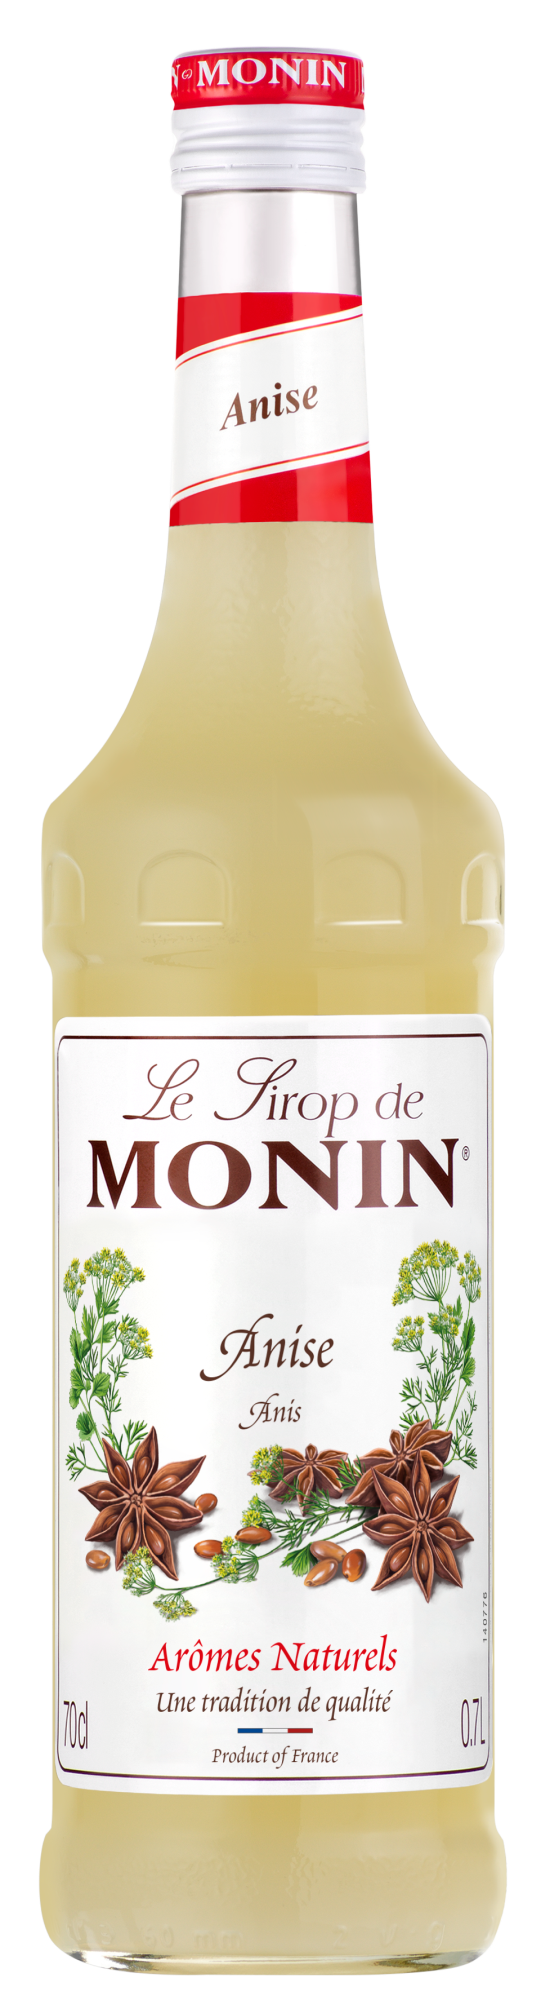 Buy MONIN Anise syrup. It has a liquorice-like flavor similar to Pastis liqueurs and aperitifs popular in the South of France